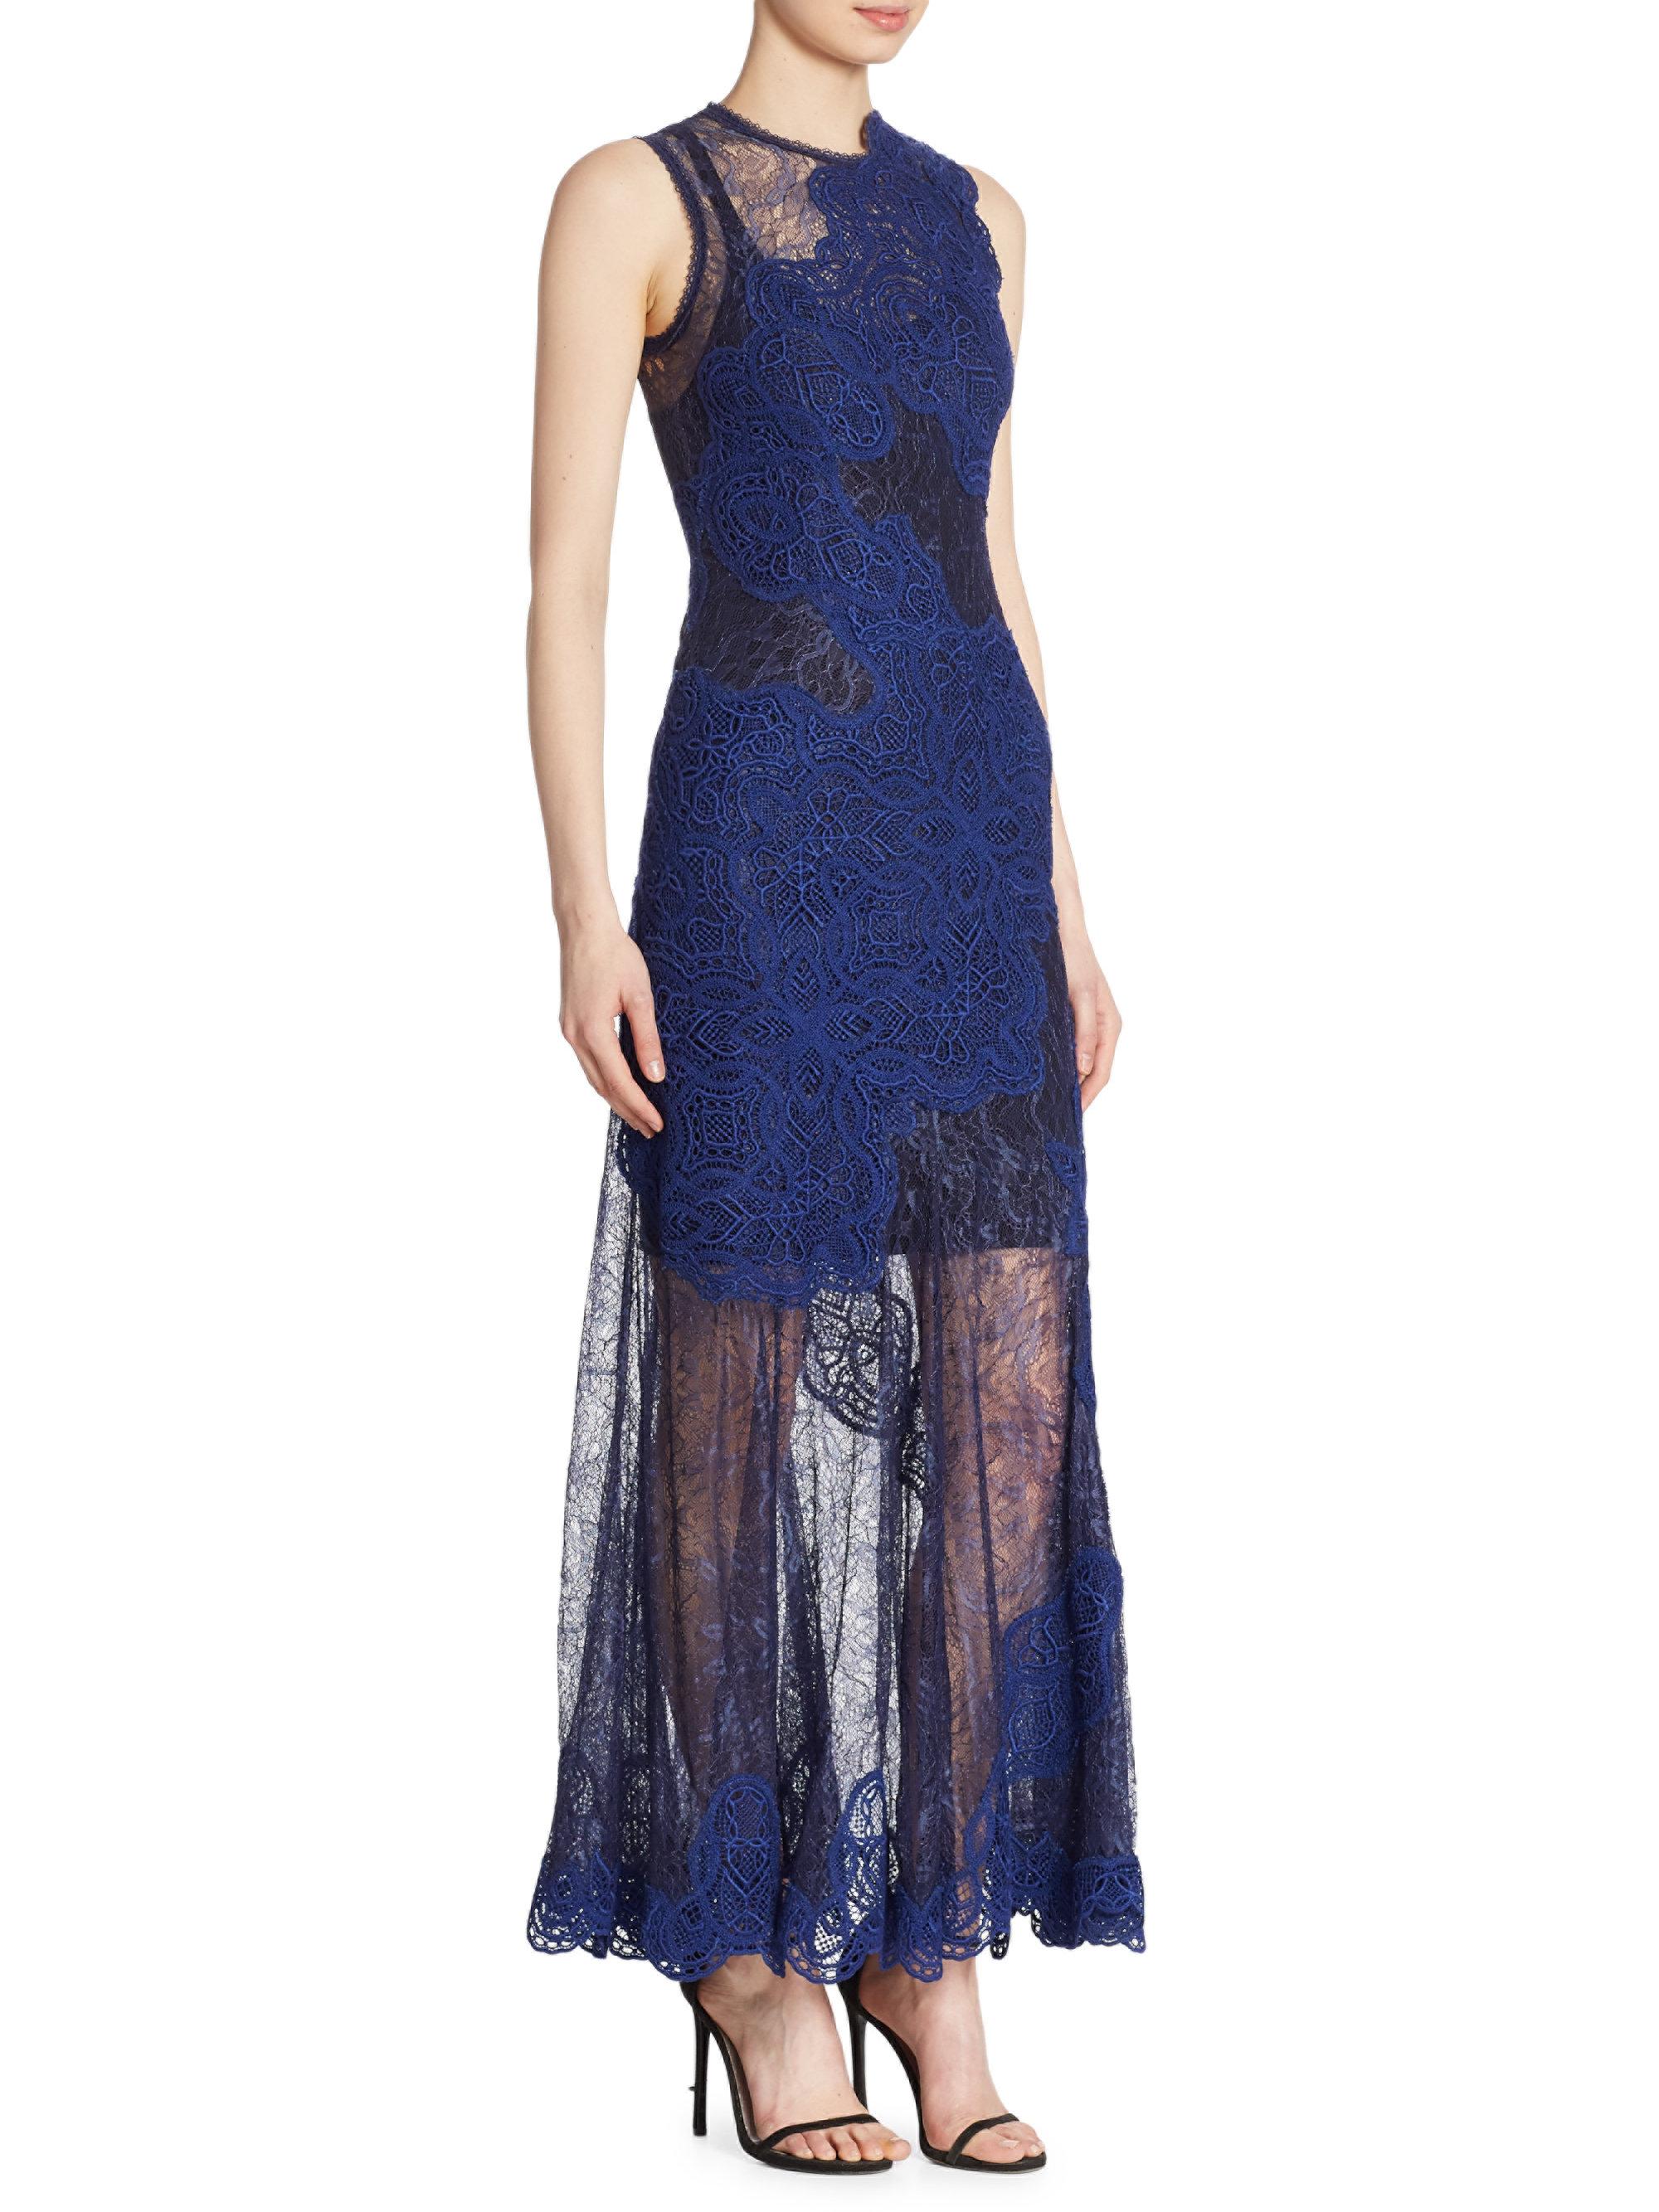 Lyst - Jonathan Simkhai Sleeveless Lace Gown in Blue